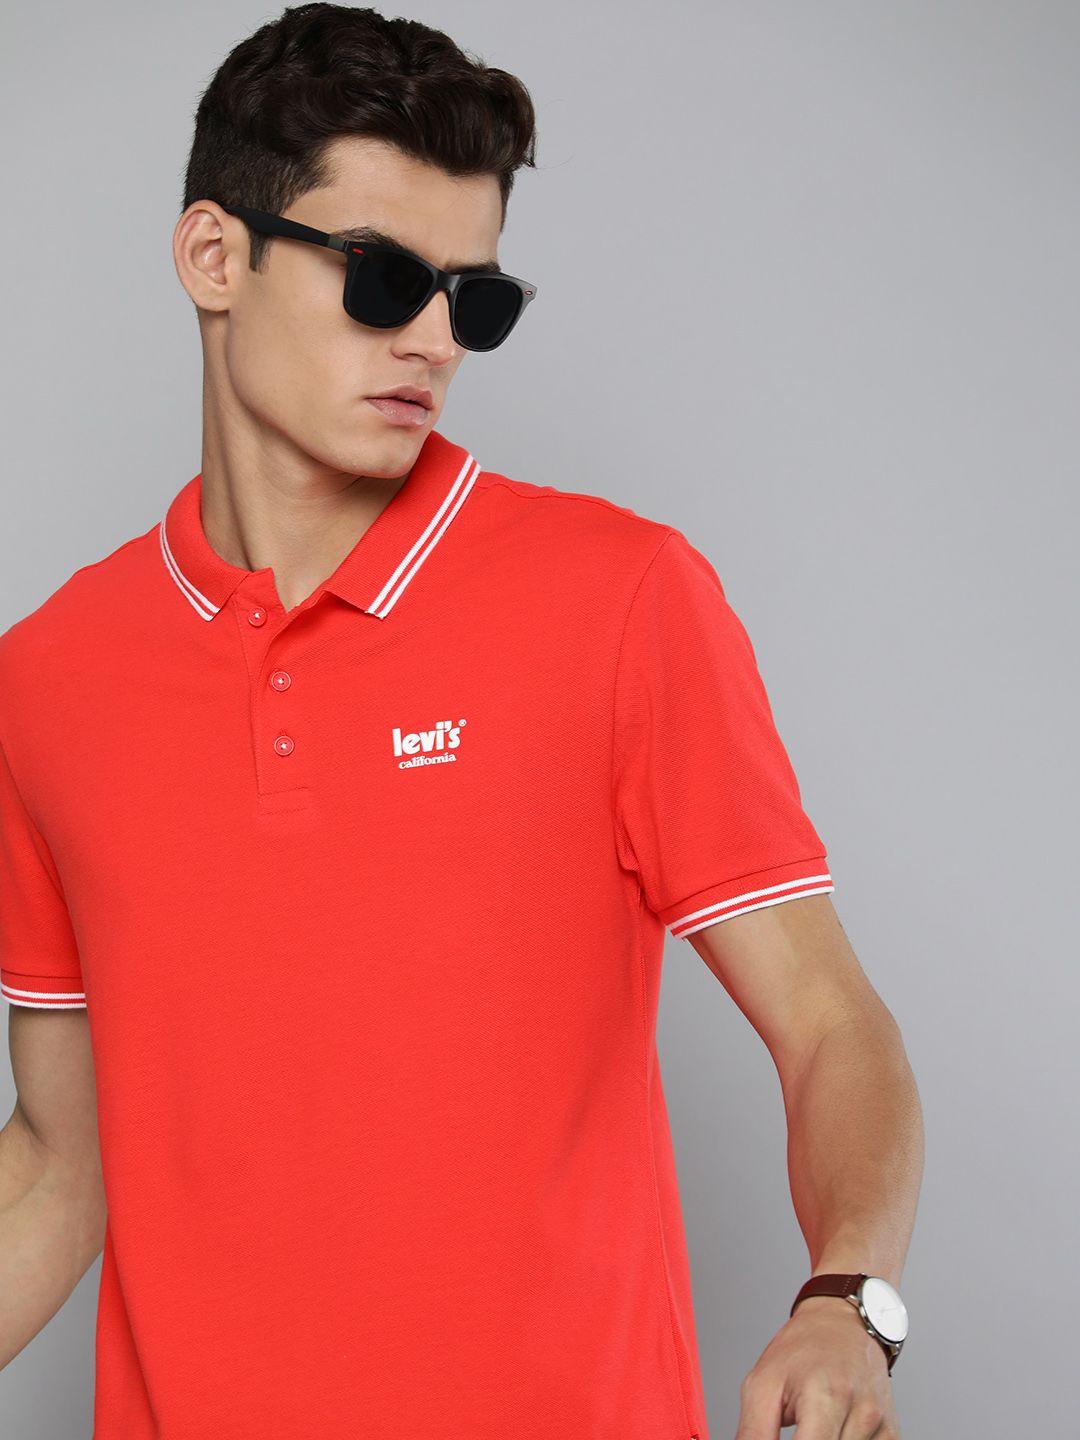 levis-men-coral-red-polo-collar-pure-cotton-t-shirt